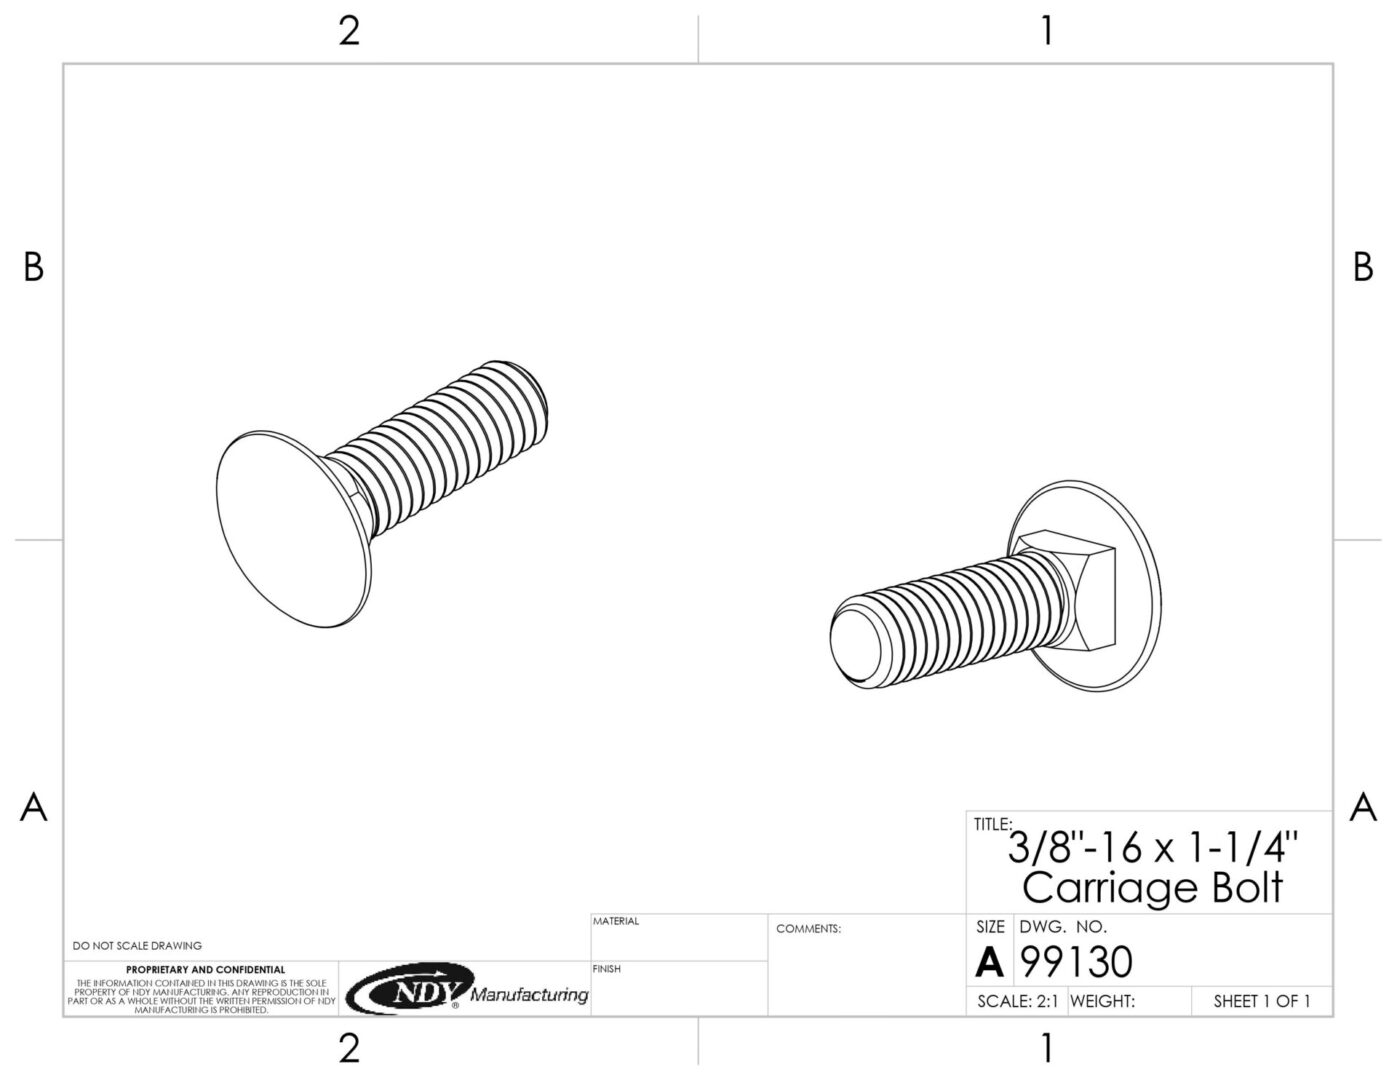 A drawing of a 1/2"-13 x 1-1/4" Carriage bolt.